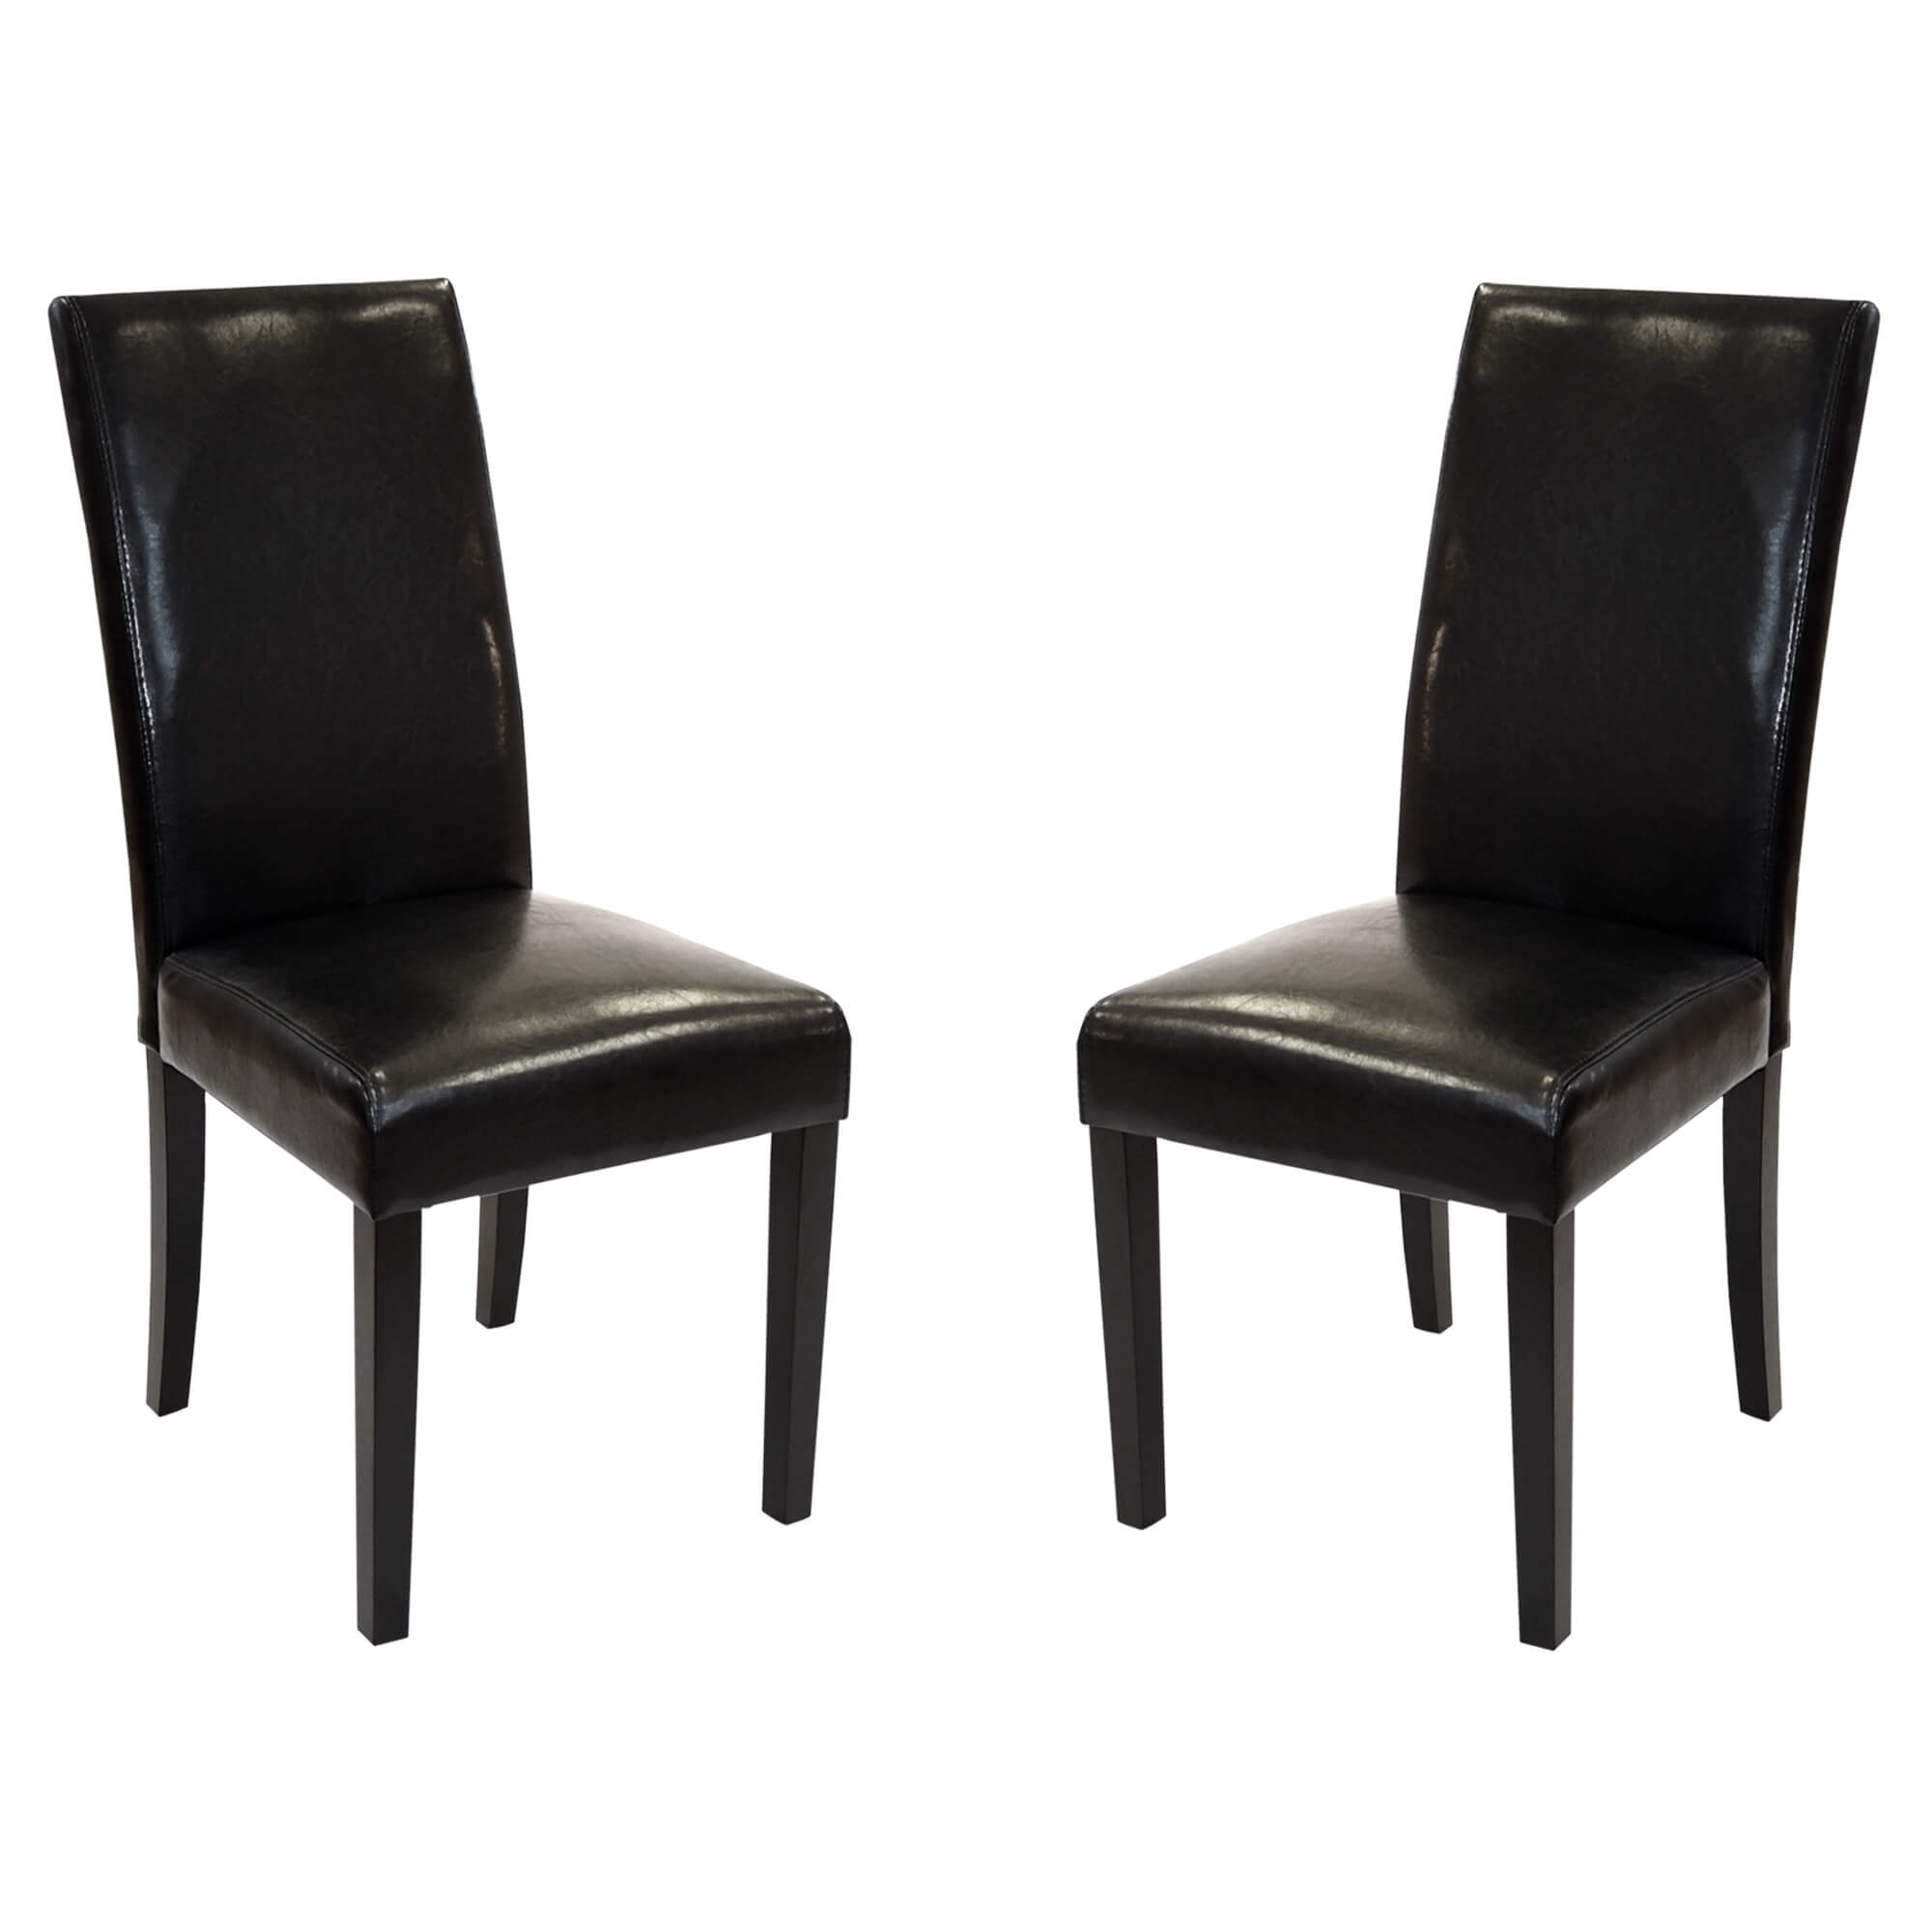 Black Bonded Leather Side Chair Md-014 - Set of 2